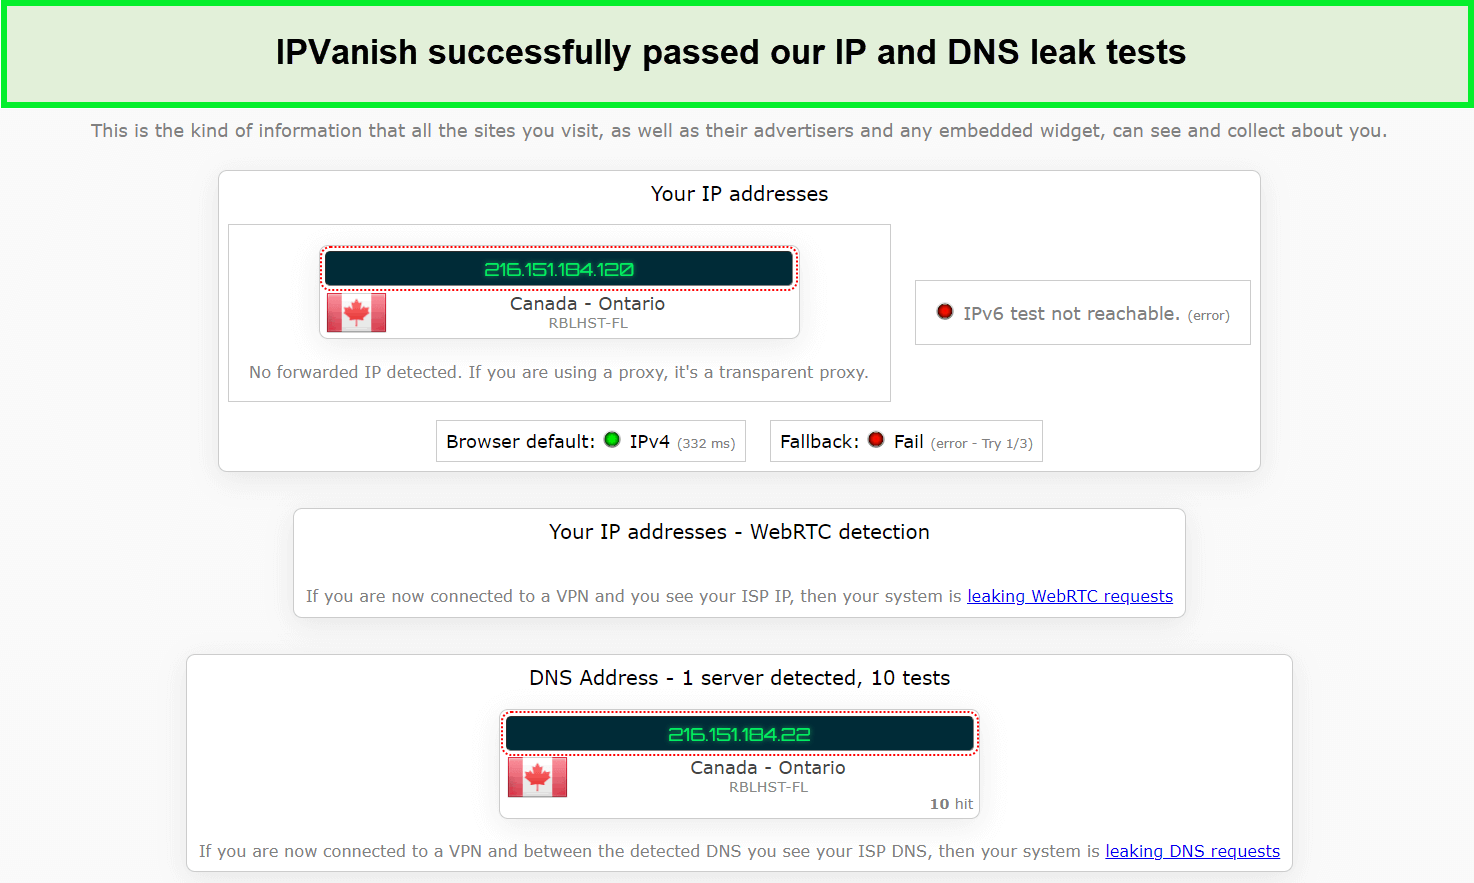 ipvanish-passed-dns-and-ip-leak-test-For German Users